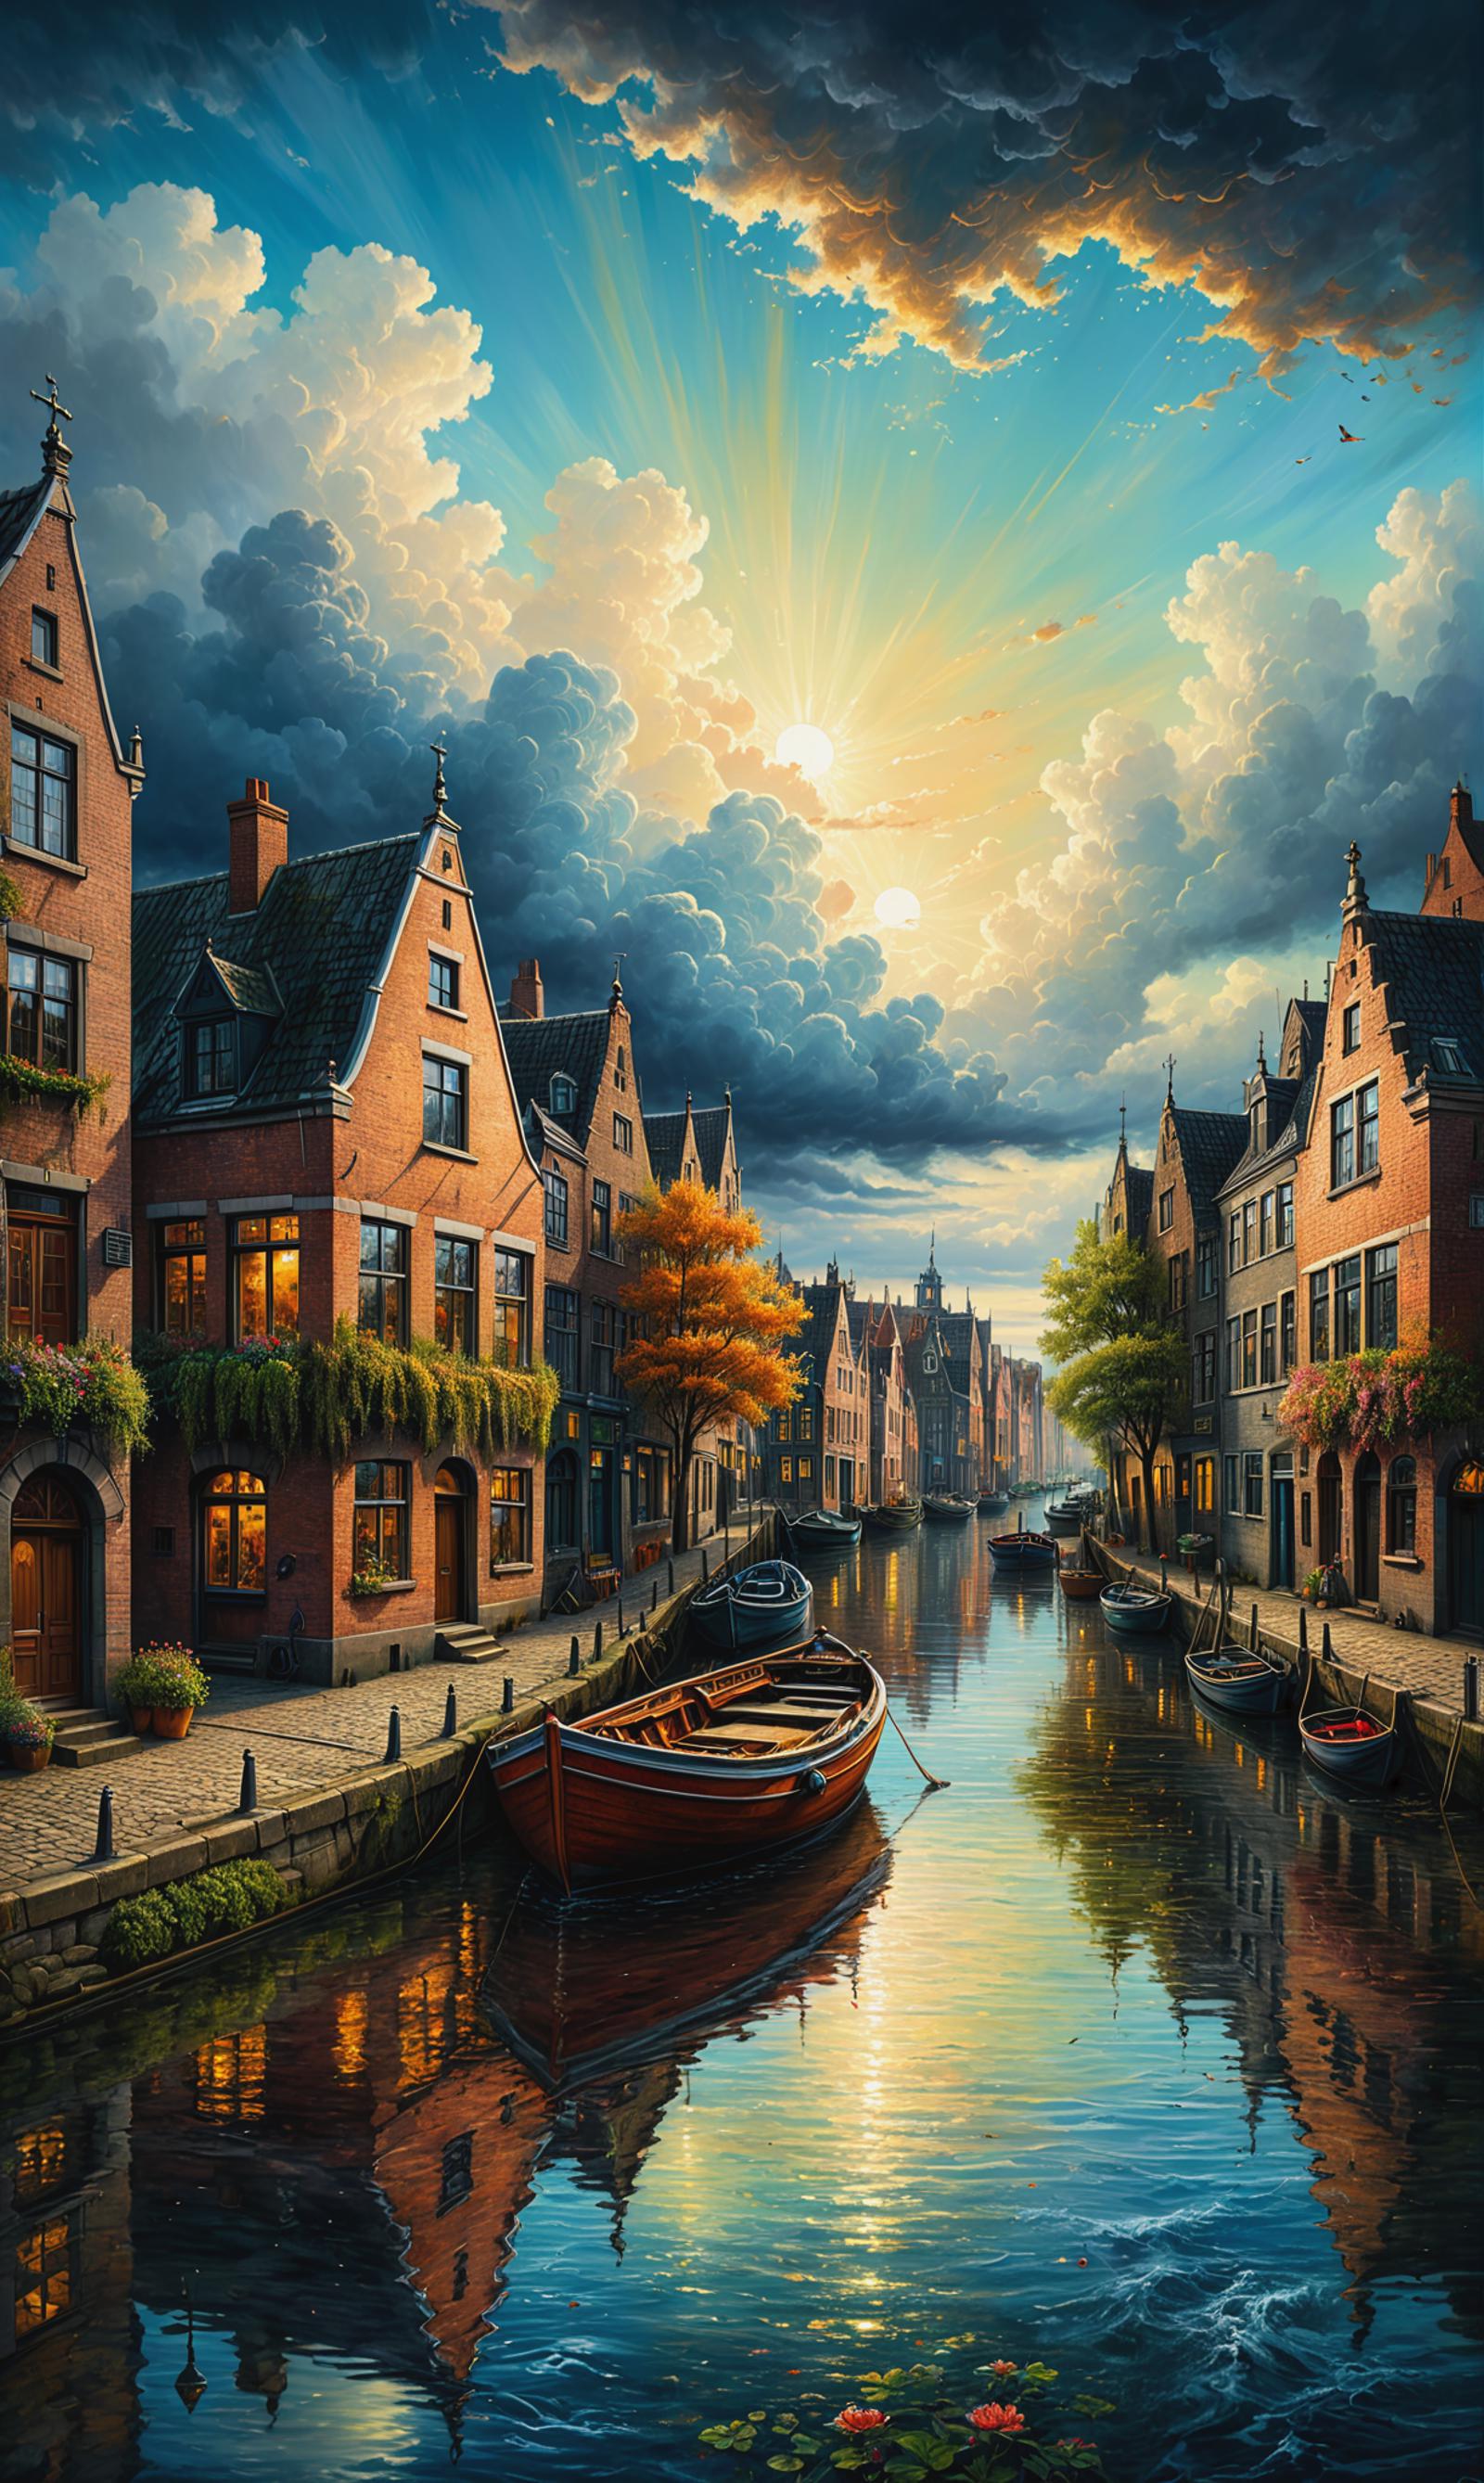 A painting of a charming European canal town with a sunlit sky, multiple boats, and beautiful architecture.